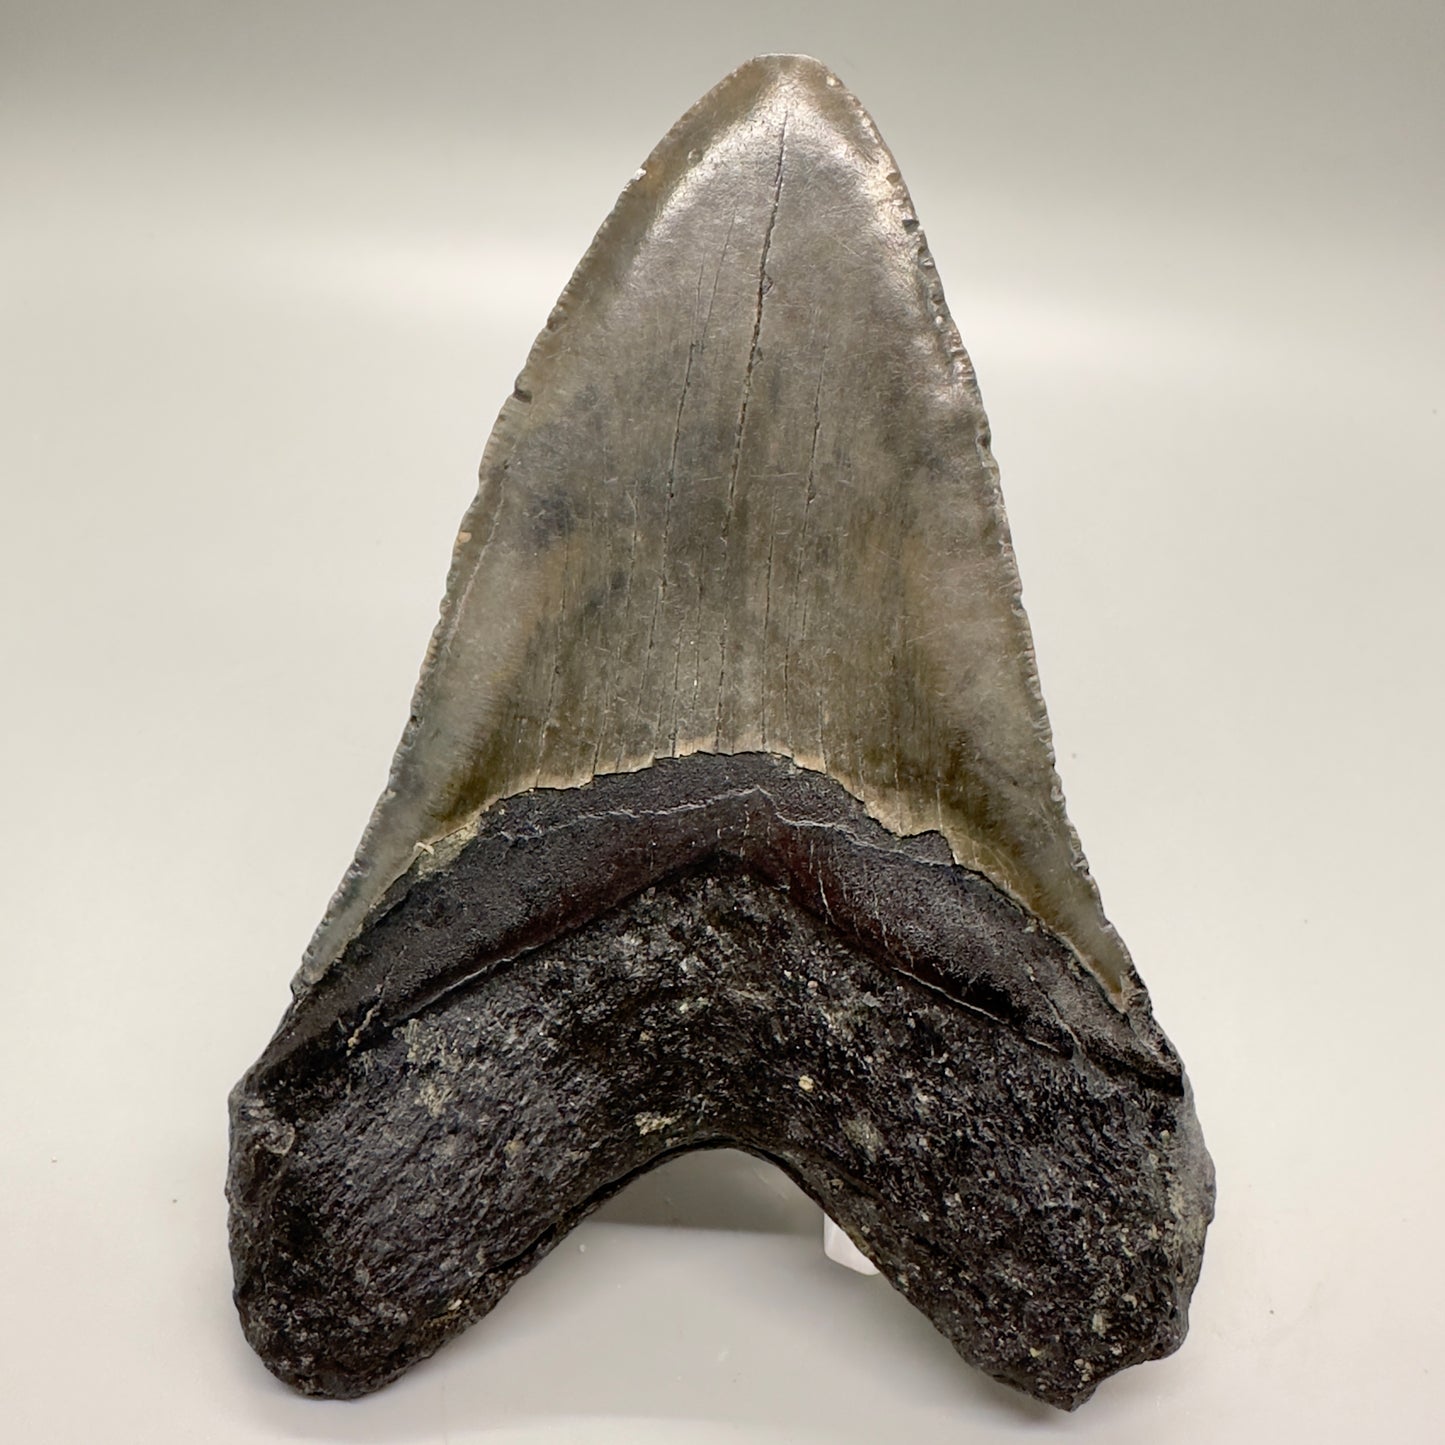 Large, with coral 5.23" Fossil Megalodon Tooth: Scuba Diving Discovery from North Carolina CM4597 - Back